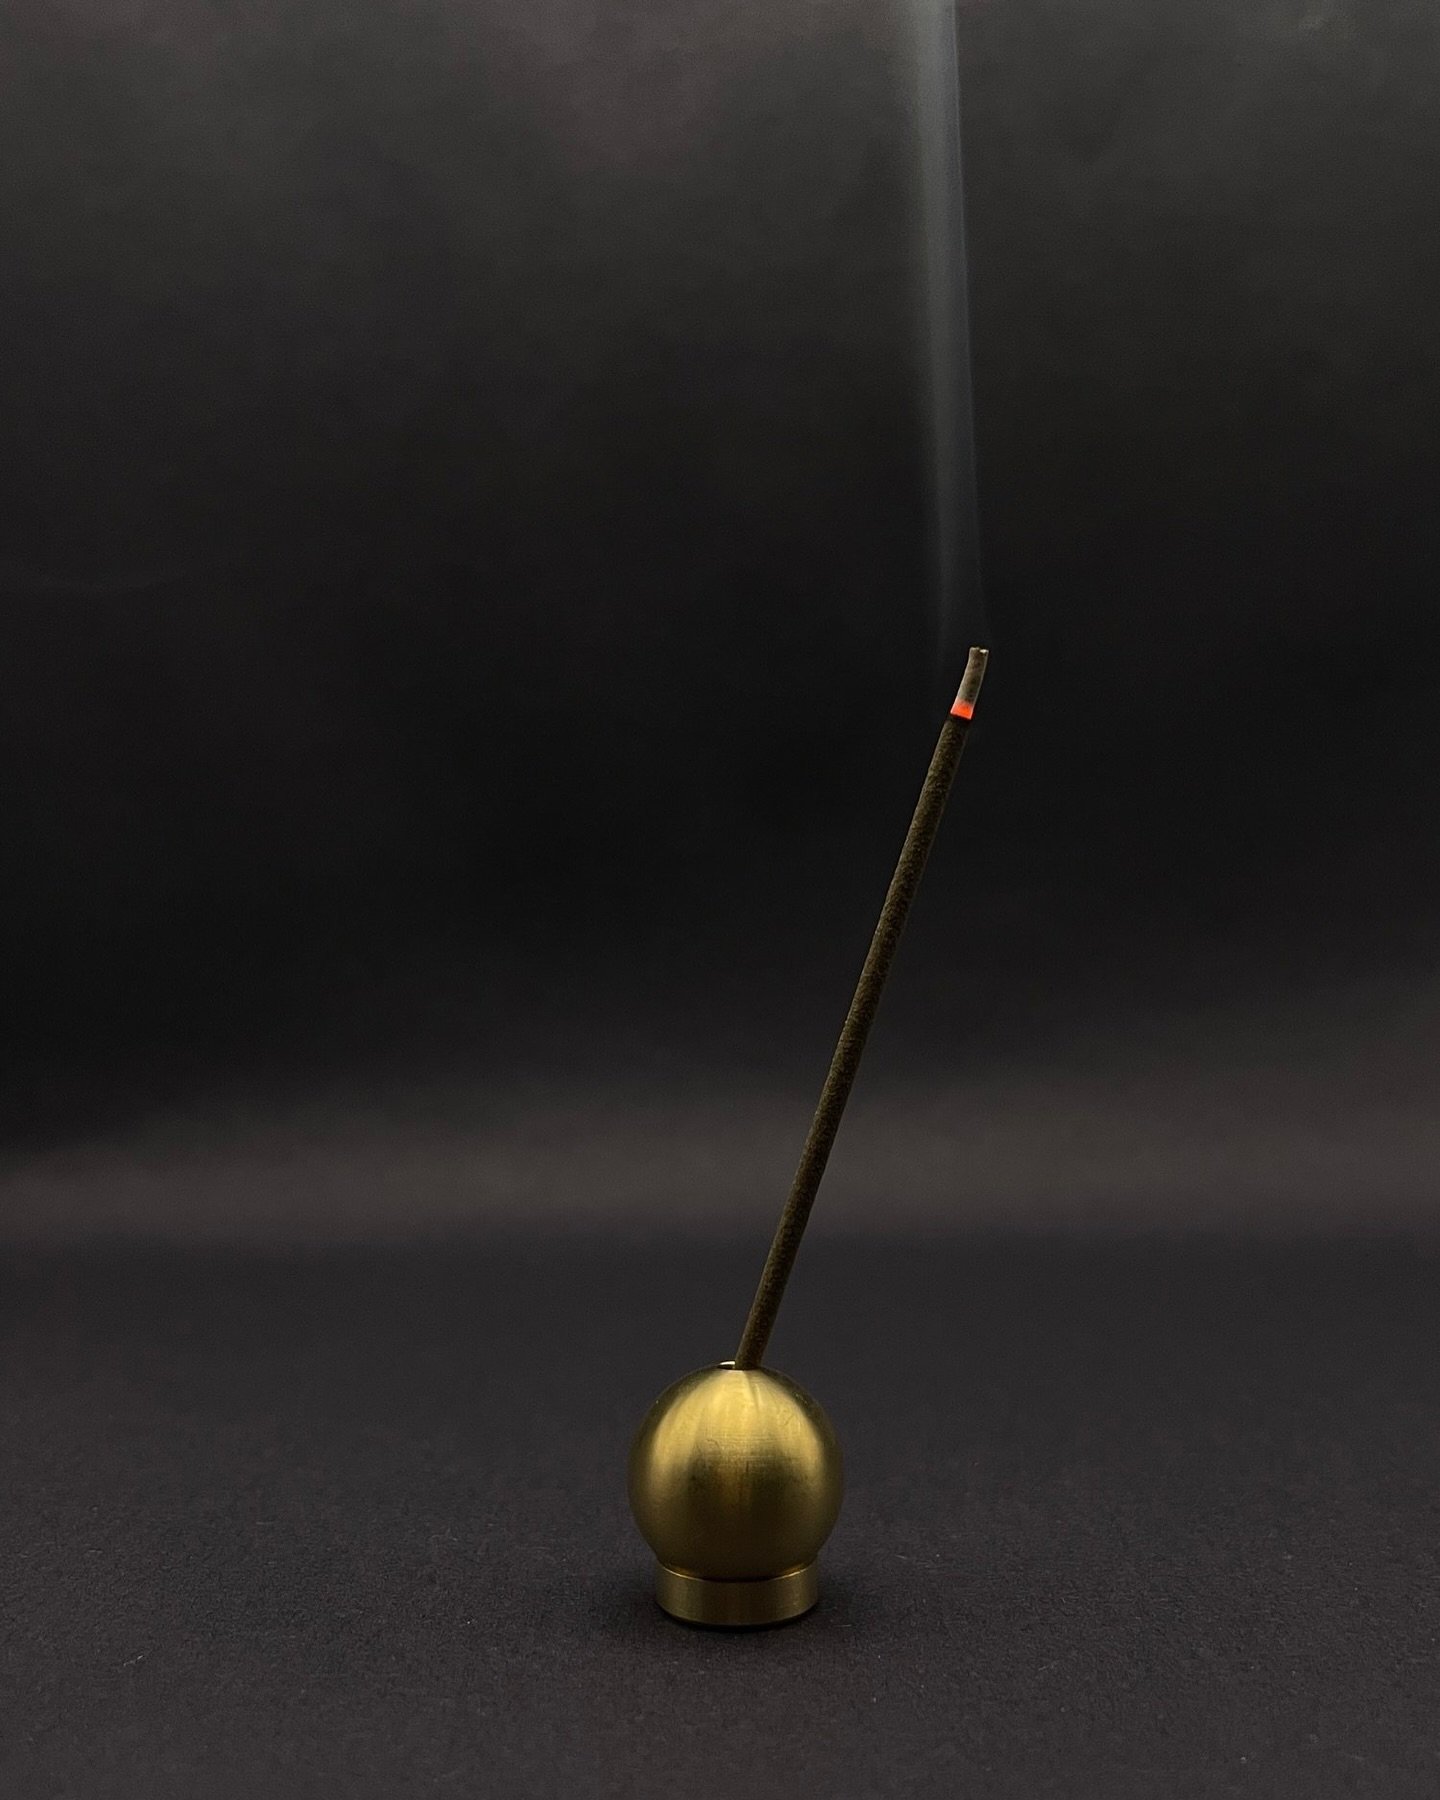 A small but weighty sphere that stabilizes your Japanese incense while it burns. A 2-piece incense holder in which the angle of the incense stick can be adjusted to your preference by rolling the sphere on the ring stand.